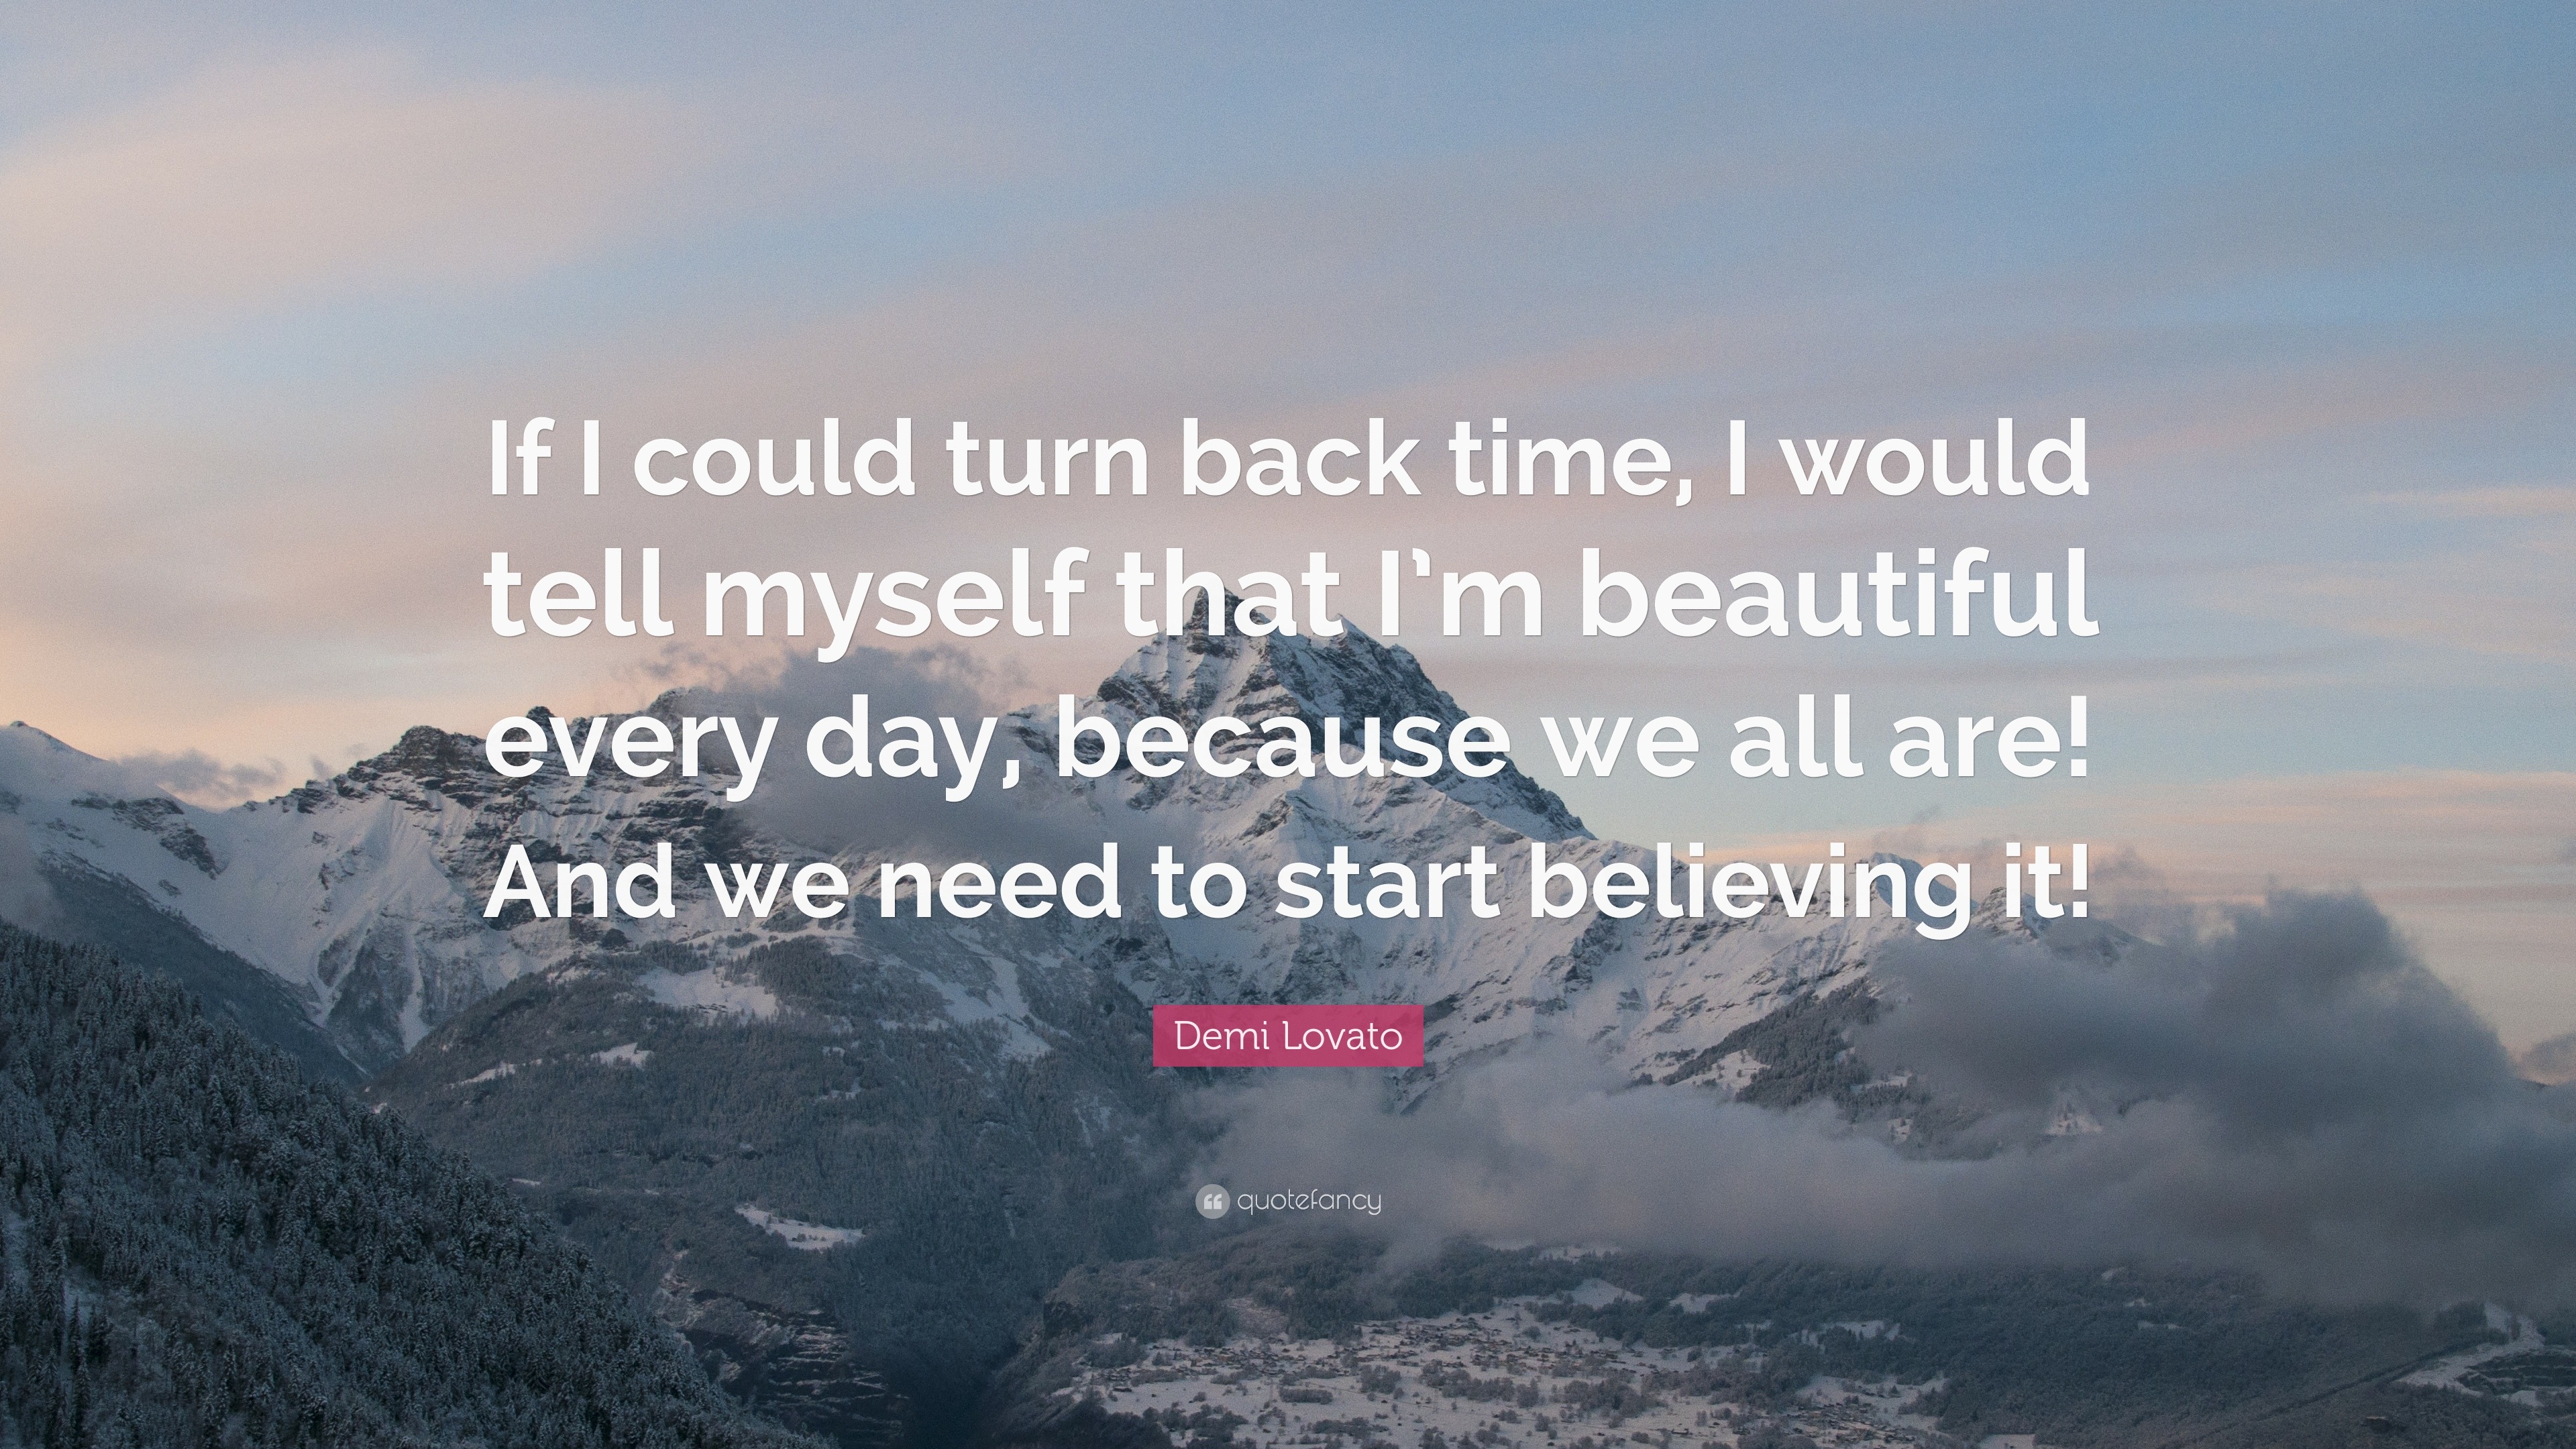 Demi Lovato Quote: “If I could turn back time, I would tell myself that I'm  beautiful every day, because we all are! And we need to start be...”